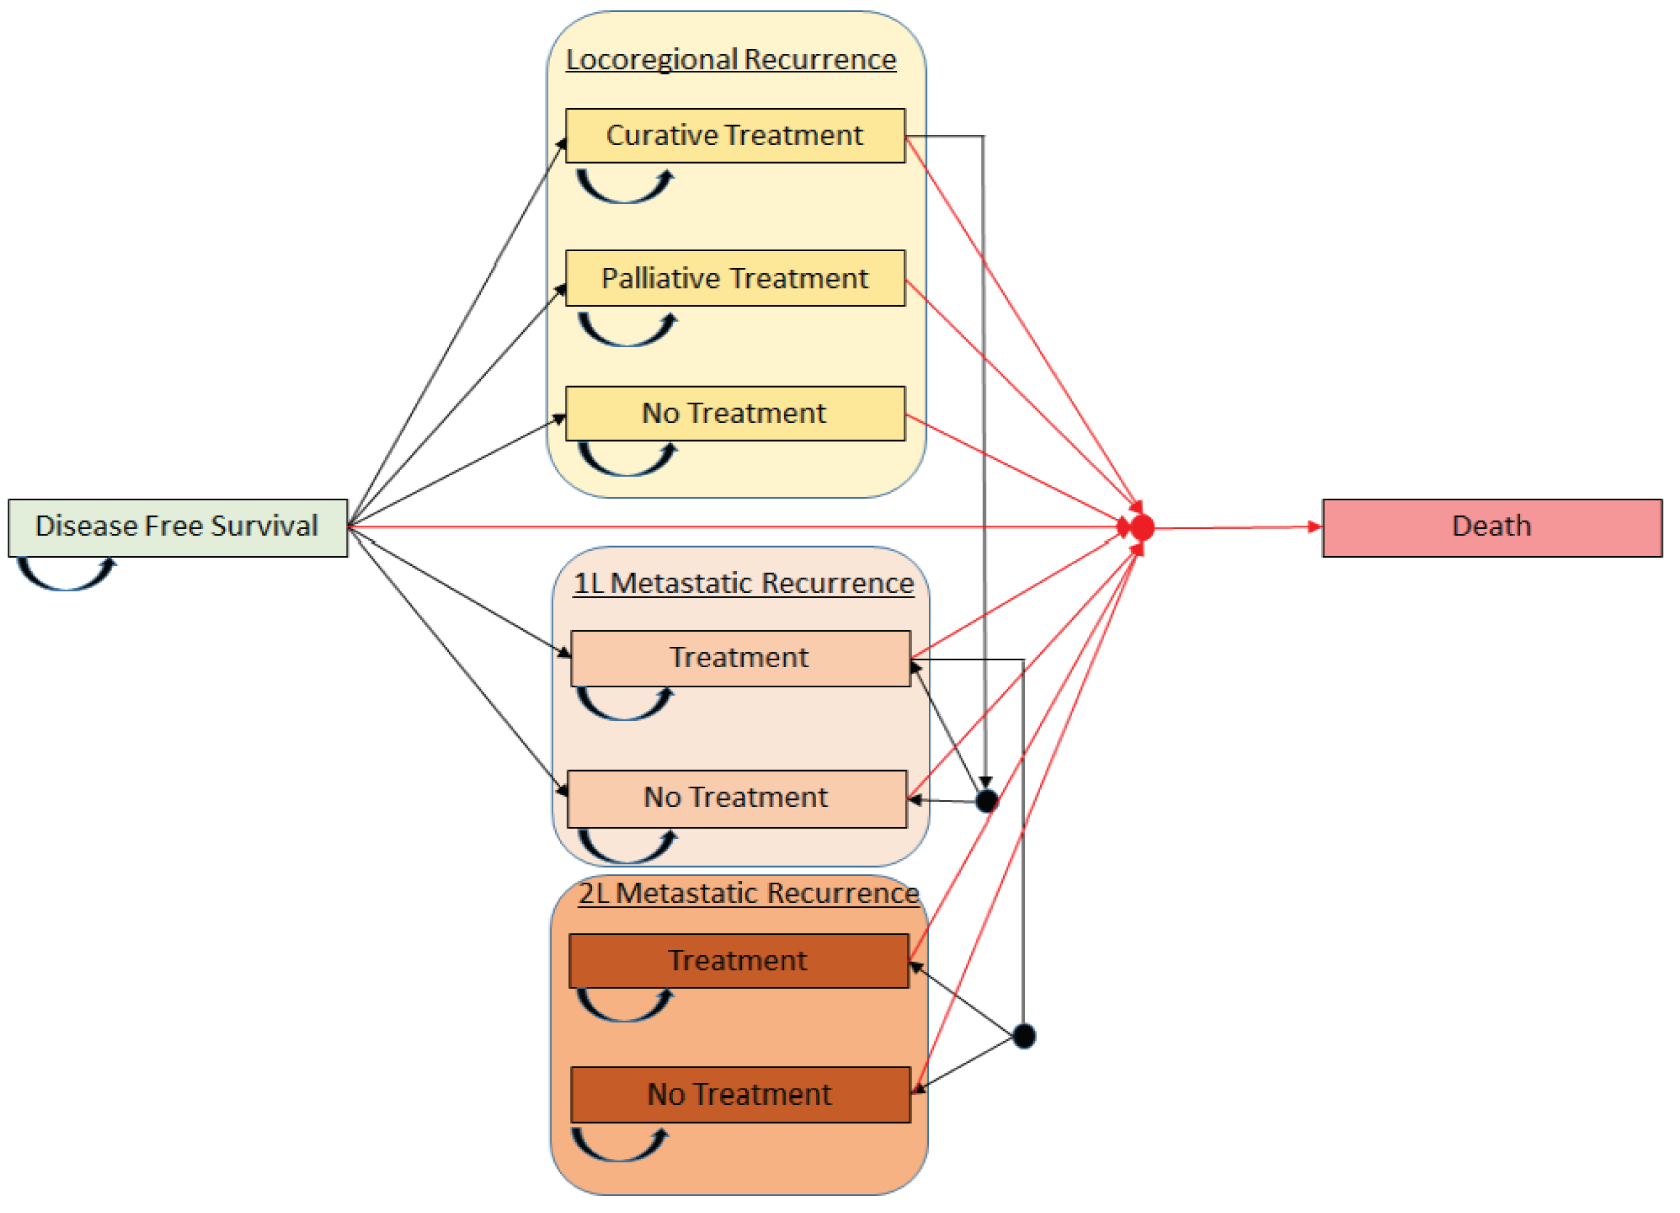 Sponsor’s model structure, consisting of 5 health states: disease-free survival, locoregional recurrence, first-line metastatic recurrence, second-line metastatic recurrence, and death. Model depicts possible transition between health states, with patients starting in the disease-free health state and then moving to a recurrence state where they may or may not receive treatment. Death was the absorbing state.